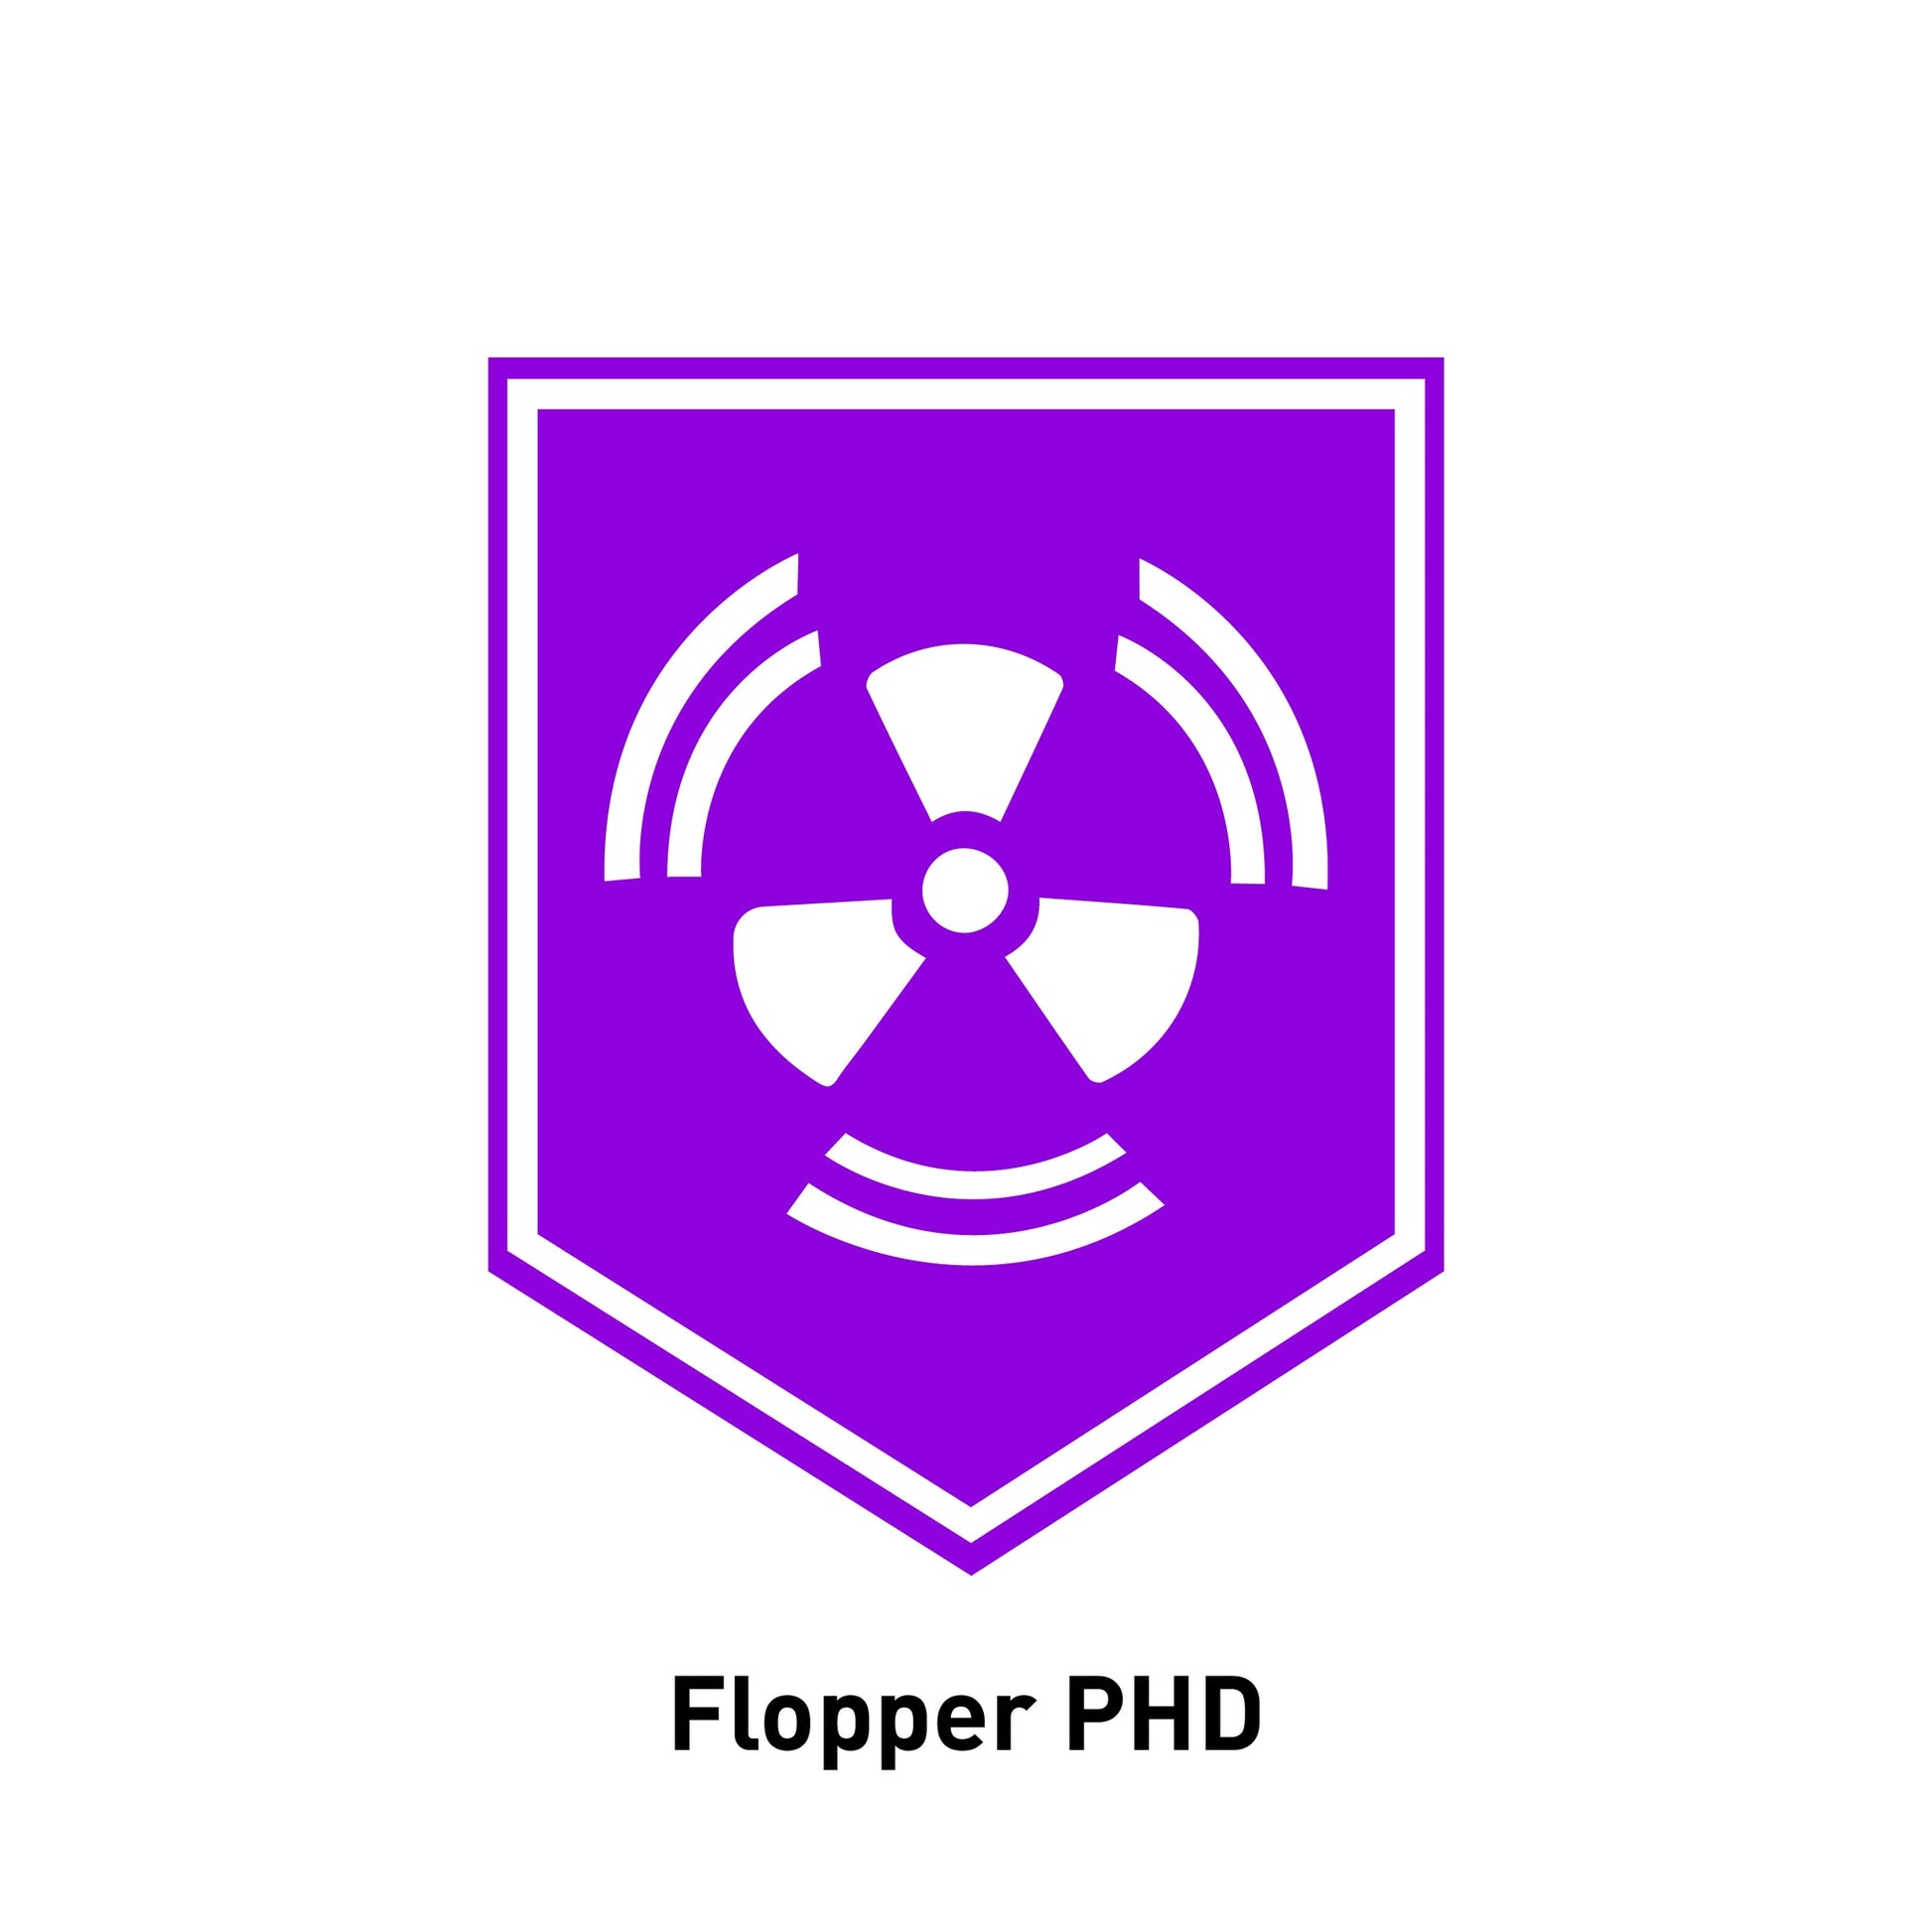 Flopper PHD Call of duty gaming decal stickers for kids bedrooms